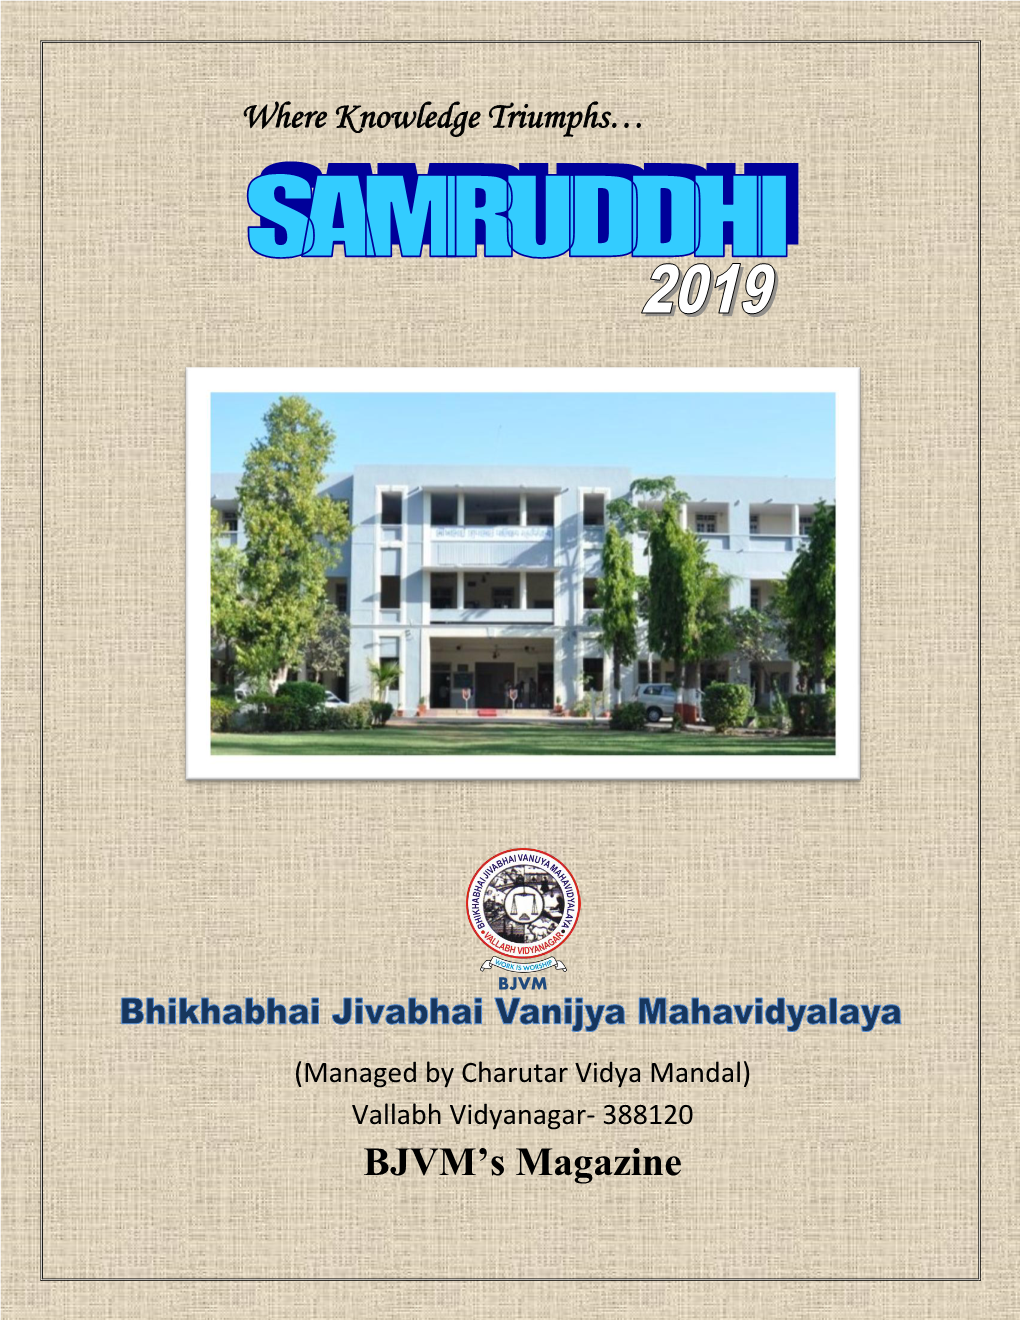 Samruddhi 2018-19 Is Here to Highlight the College Progress and Development, to Acknowledge the Past Achievements and Welcome the Future in Right Direction